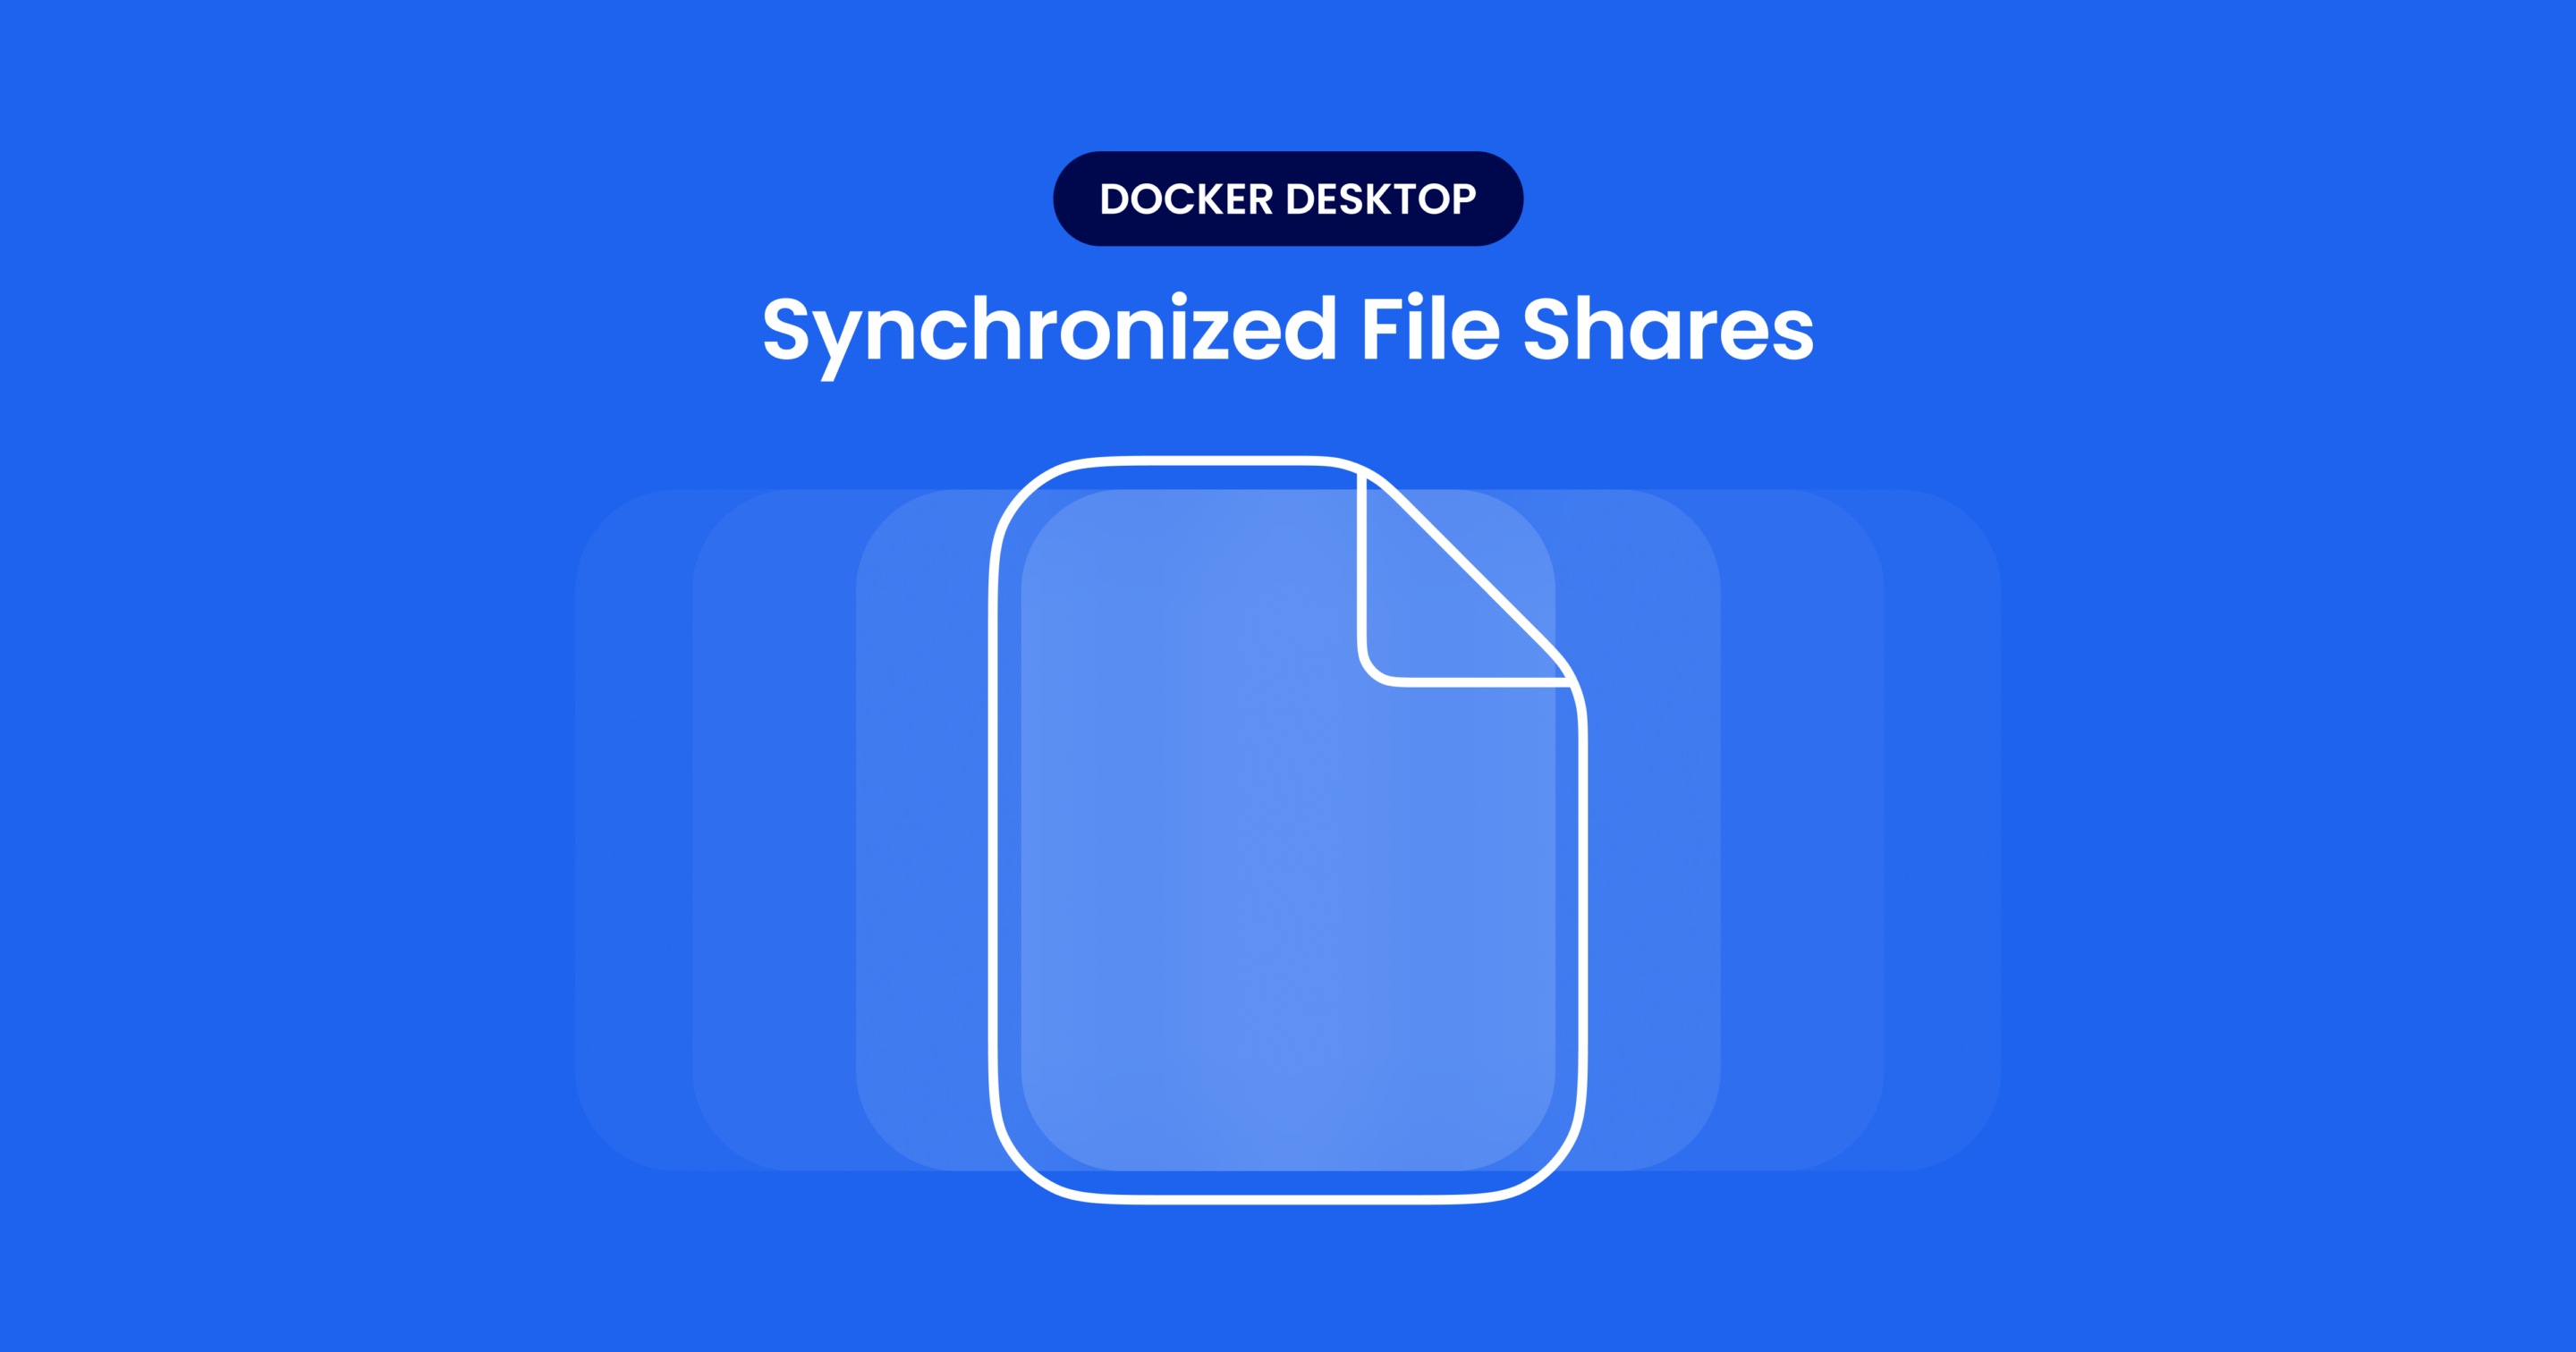 「 2-10x Faster File Operation Faster with Synchronized File Shares in Docker Desktop」を参照してください。